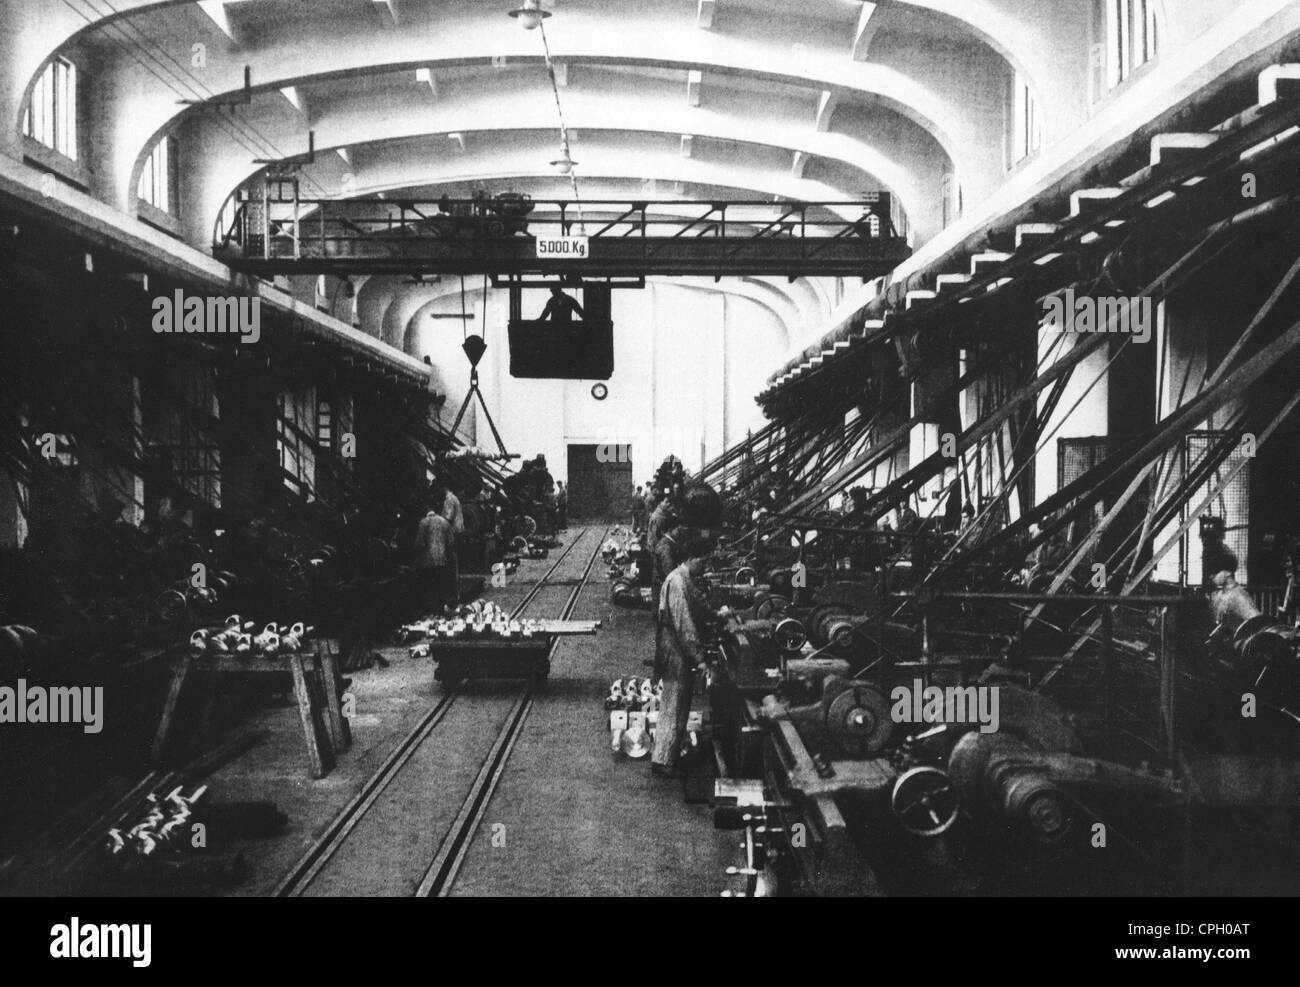 industry, metal industry, Krupp, production hall for metal devices, circa 1900, Additional-Rights-Clearences-Not Available Stock Photo